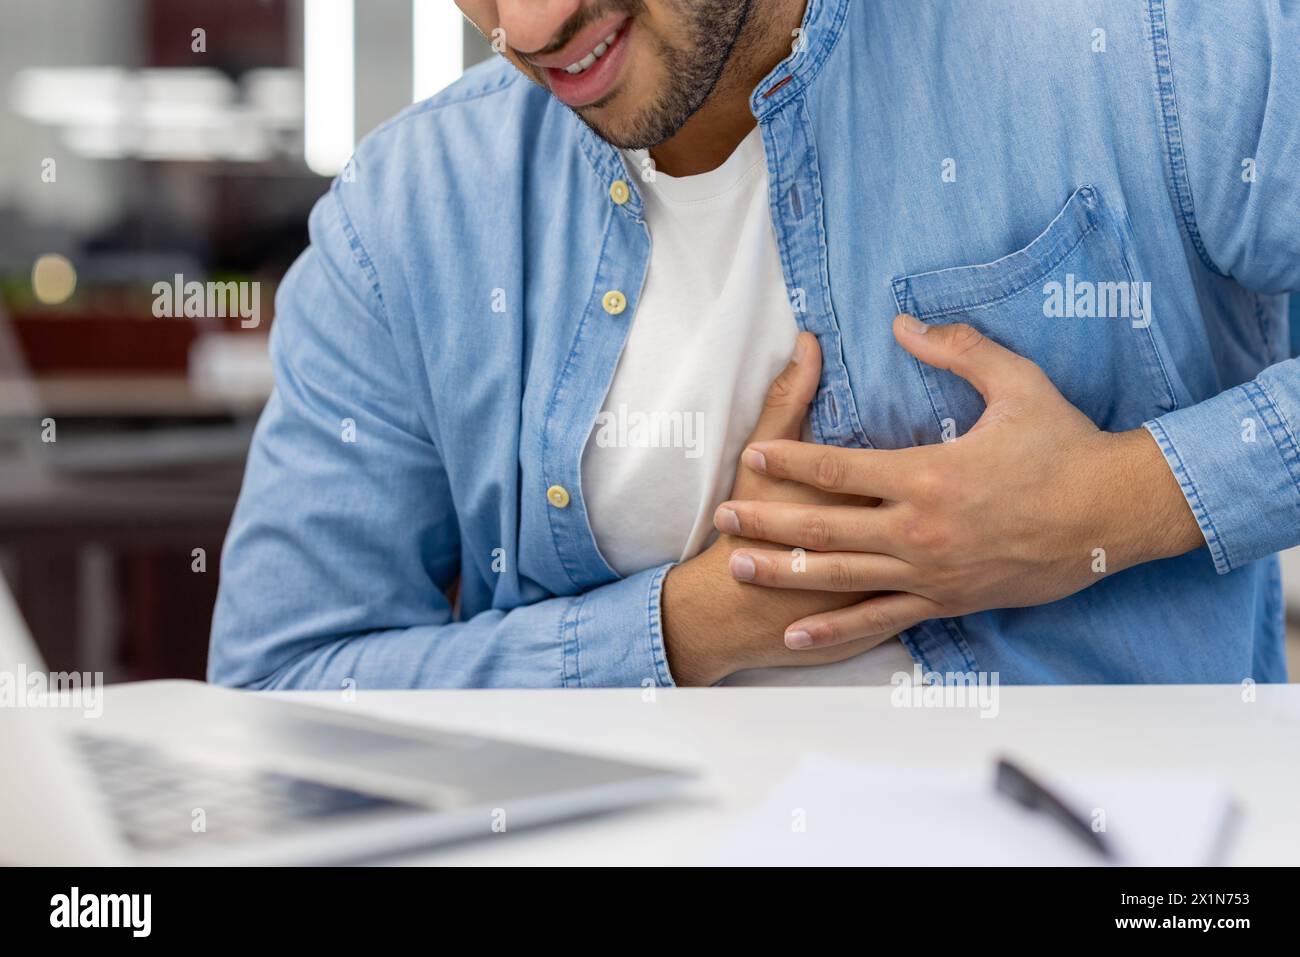 A close-up photo in the working office of a young man's hands holding his chest, feeling a strong pain in his heart. Stock Photo